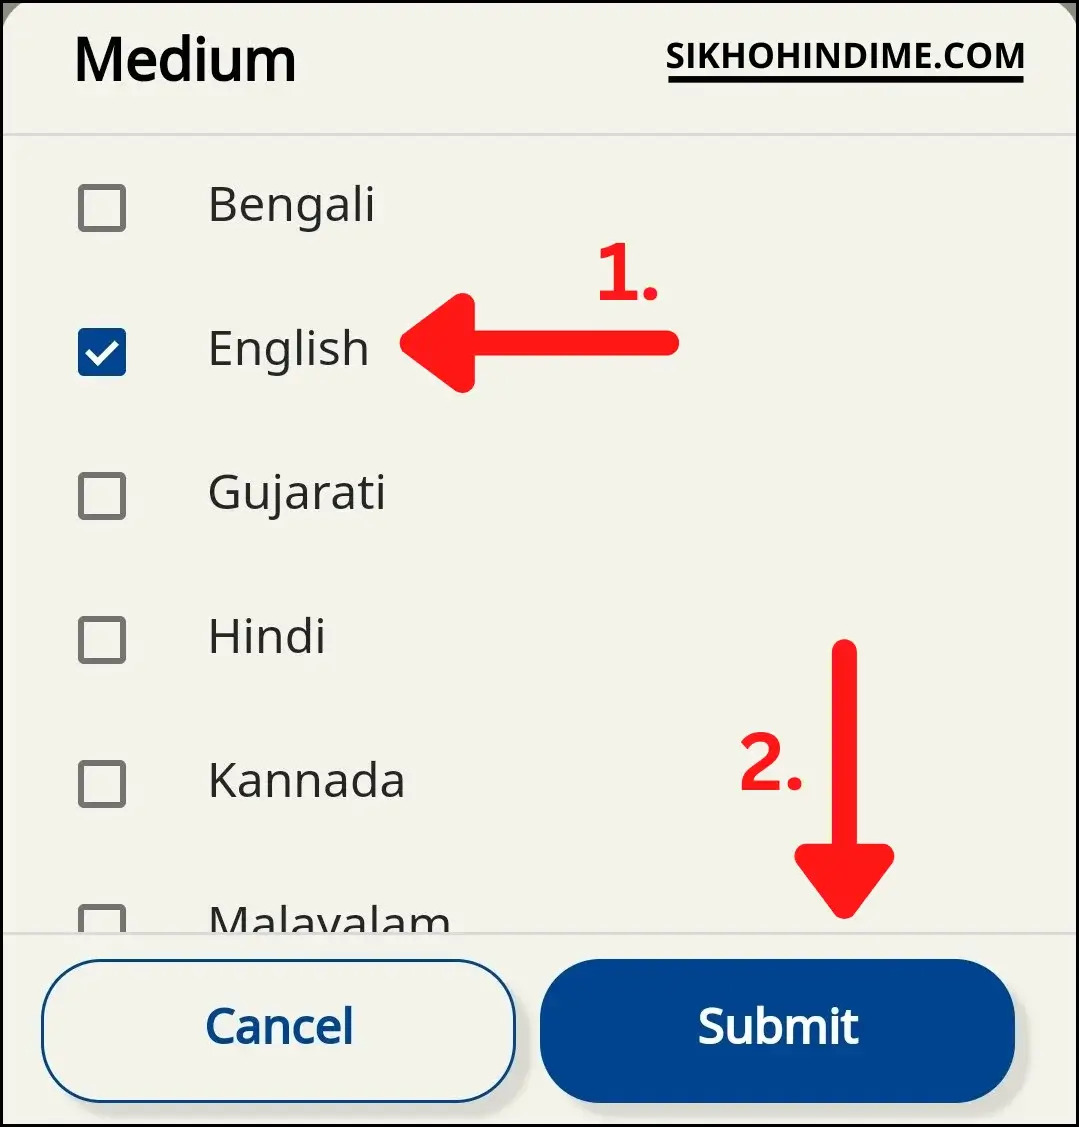 Select medium and click on submit